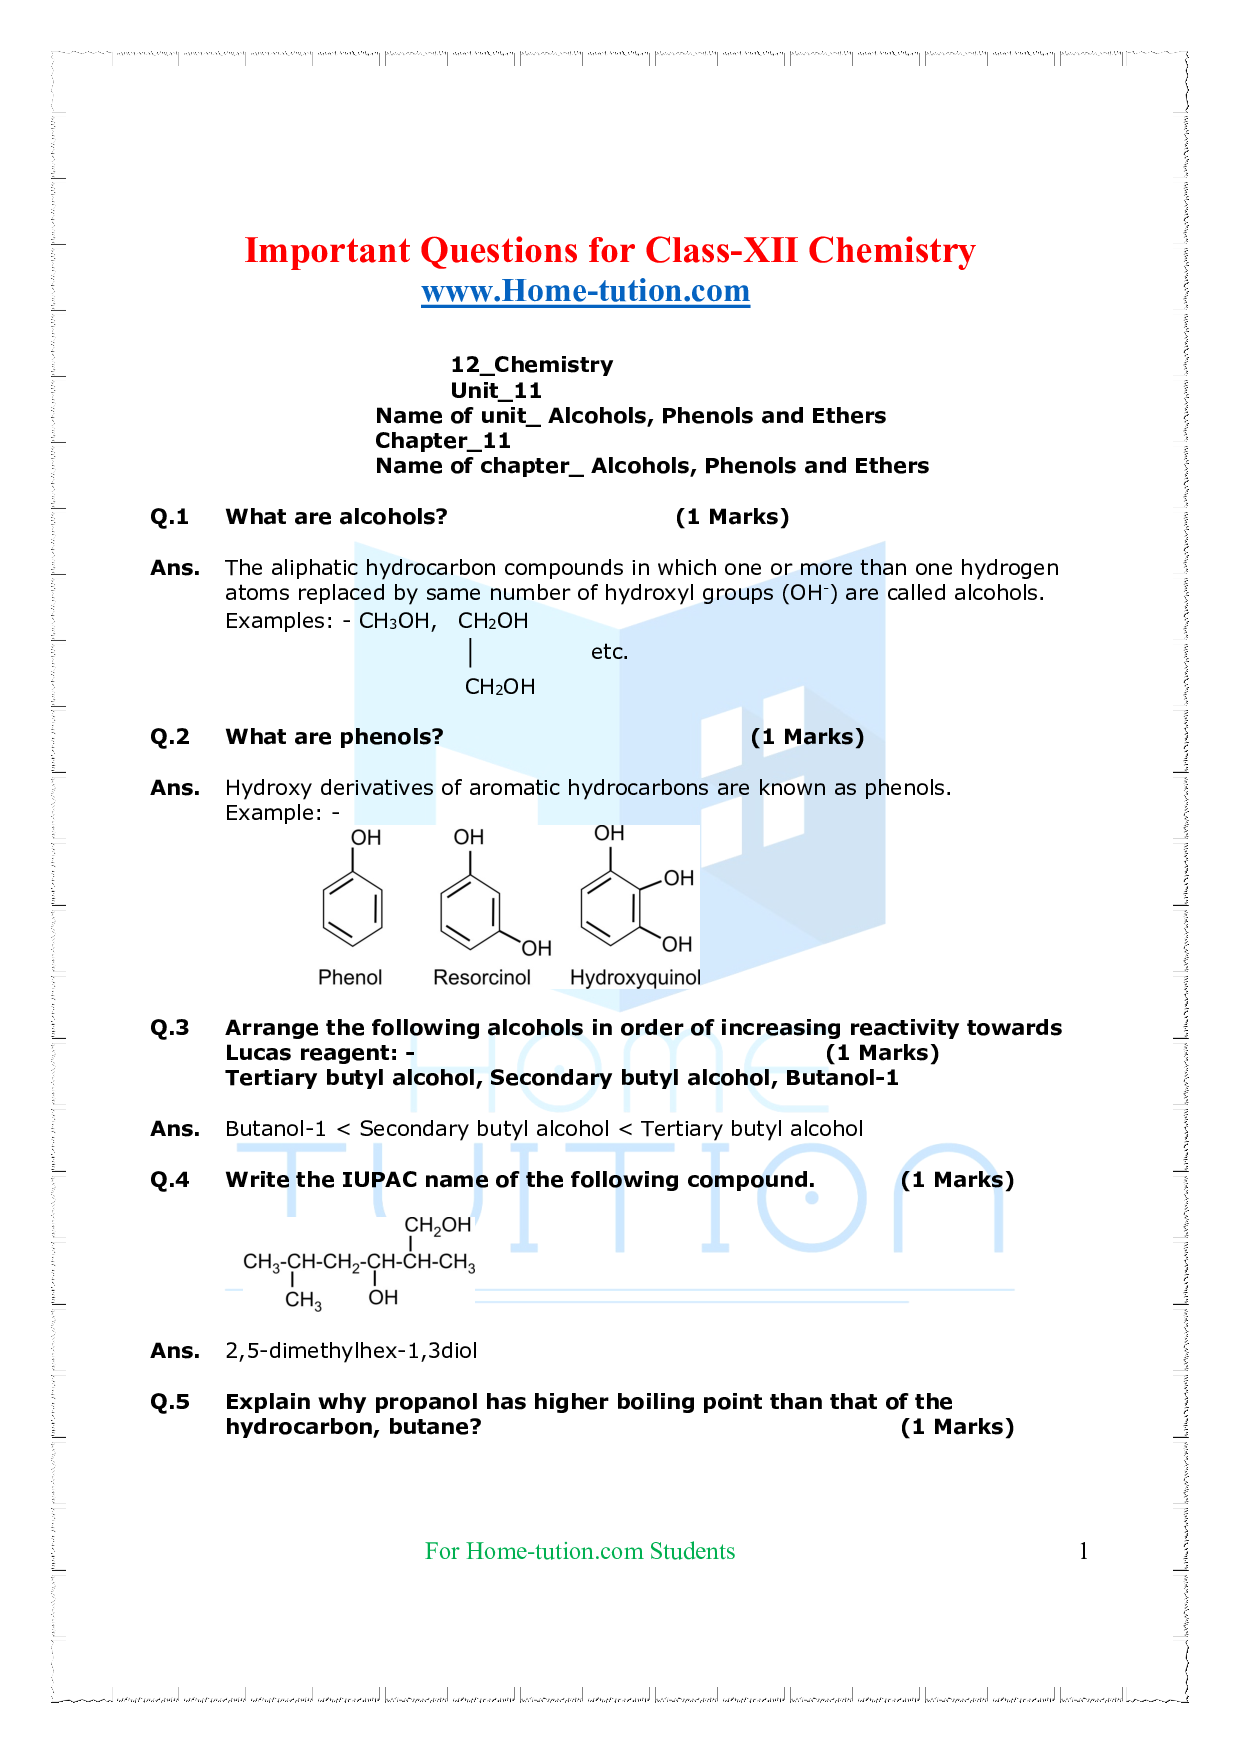 case study questions from alcohols phenols and ethers